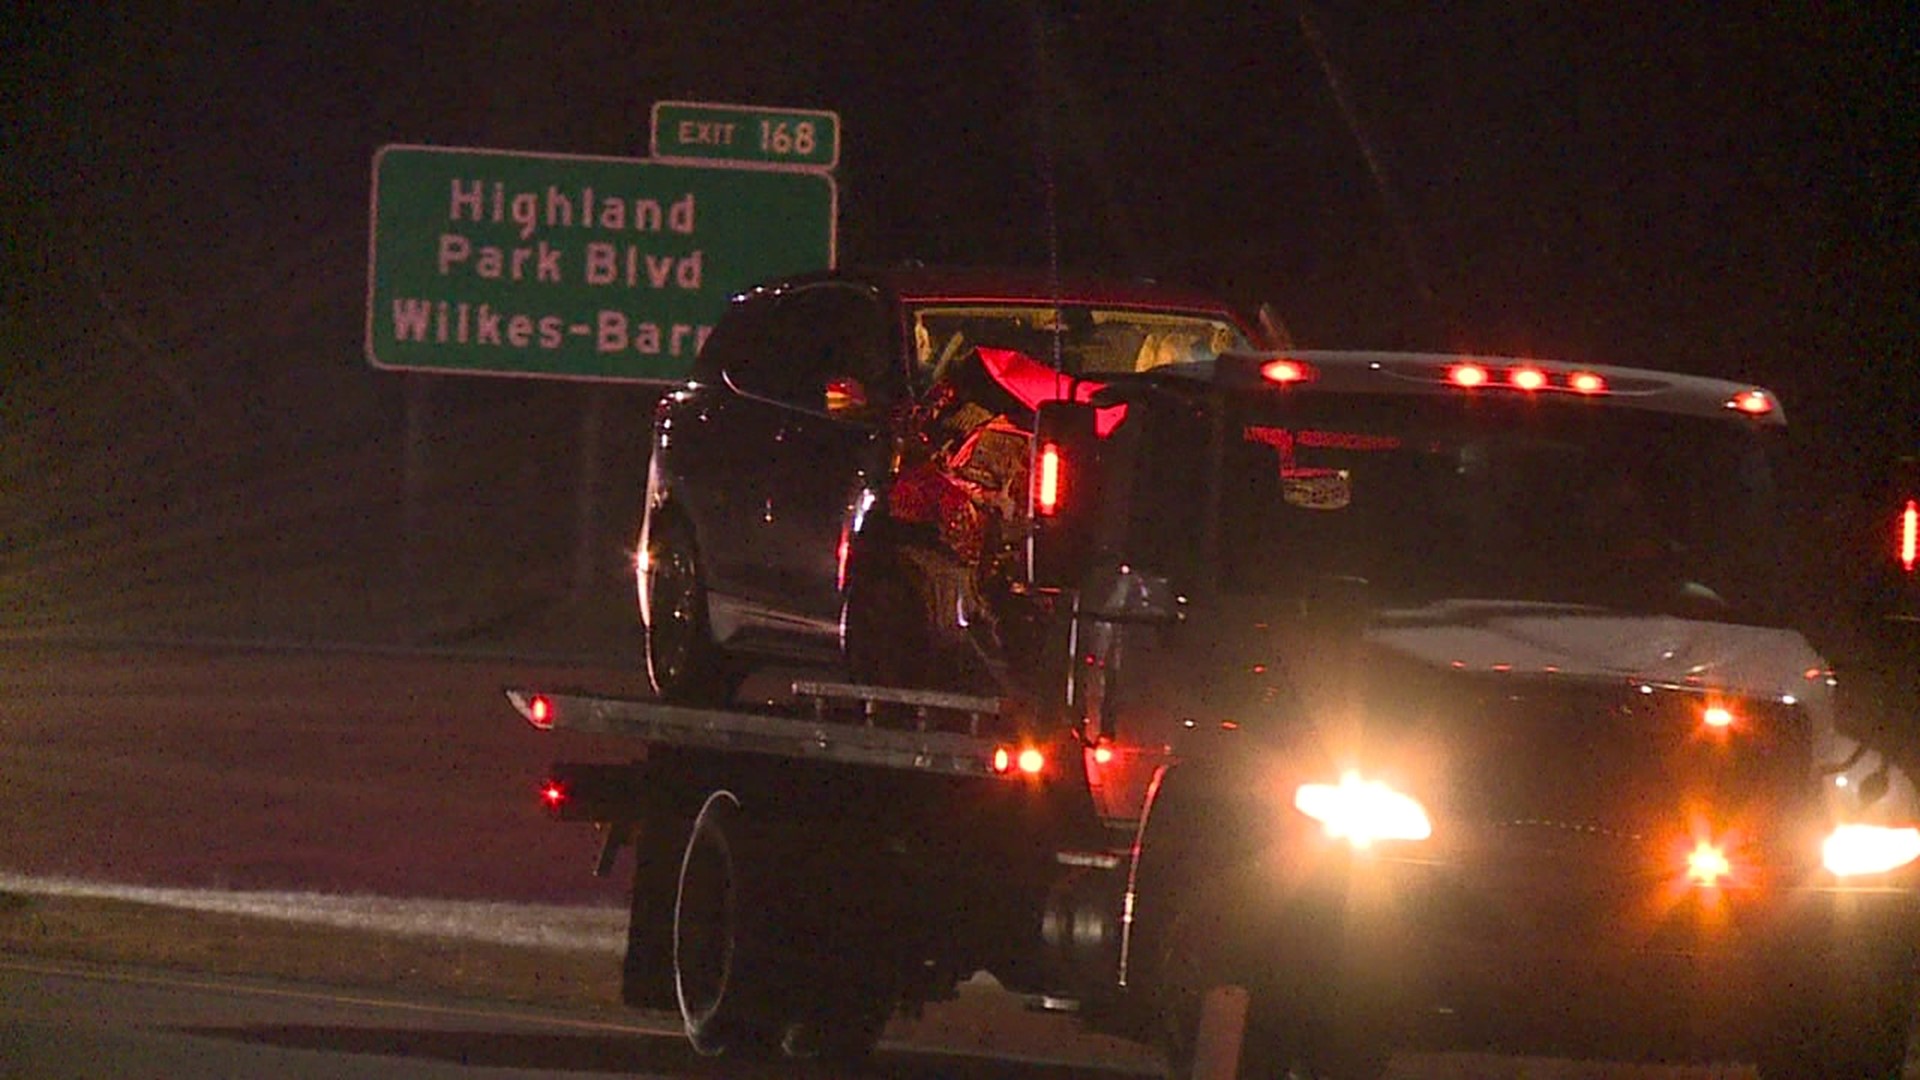 The crash happened around 11:30 p.m. Friday near the Highland Park Boulevard exit in Wilkes-Barre Township.